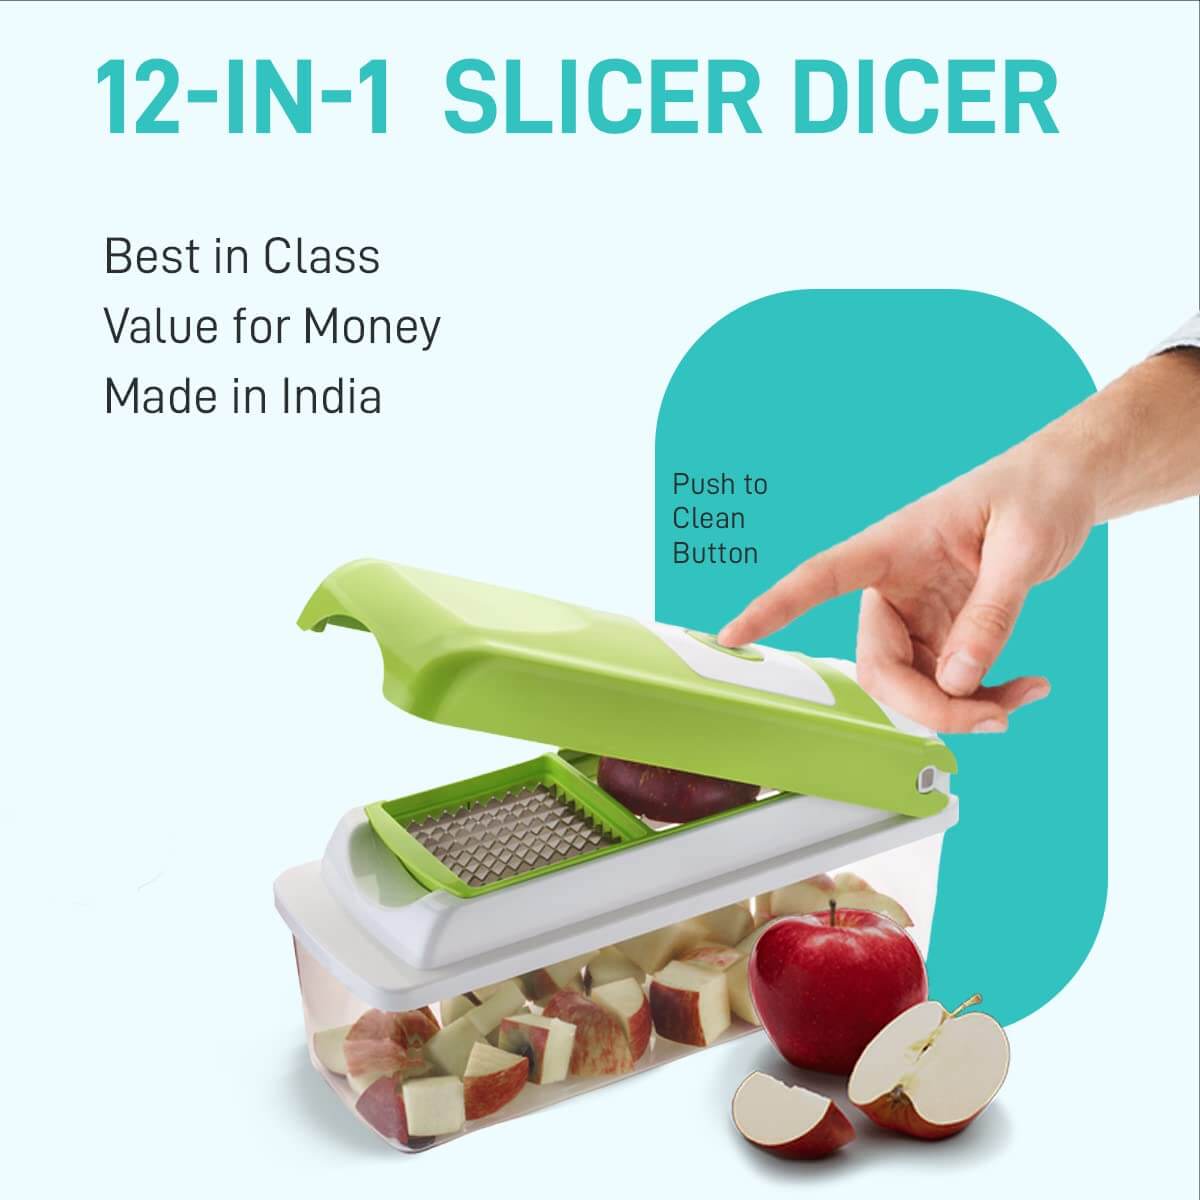 Powerful Vegetable Dicer: Slice, Dice & More!, by iohhjghjhj